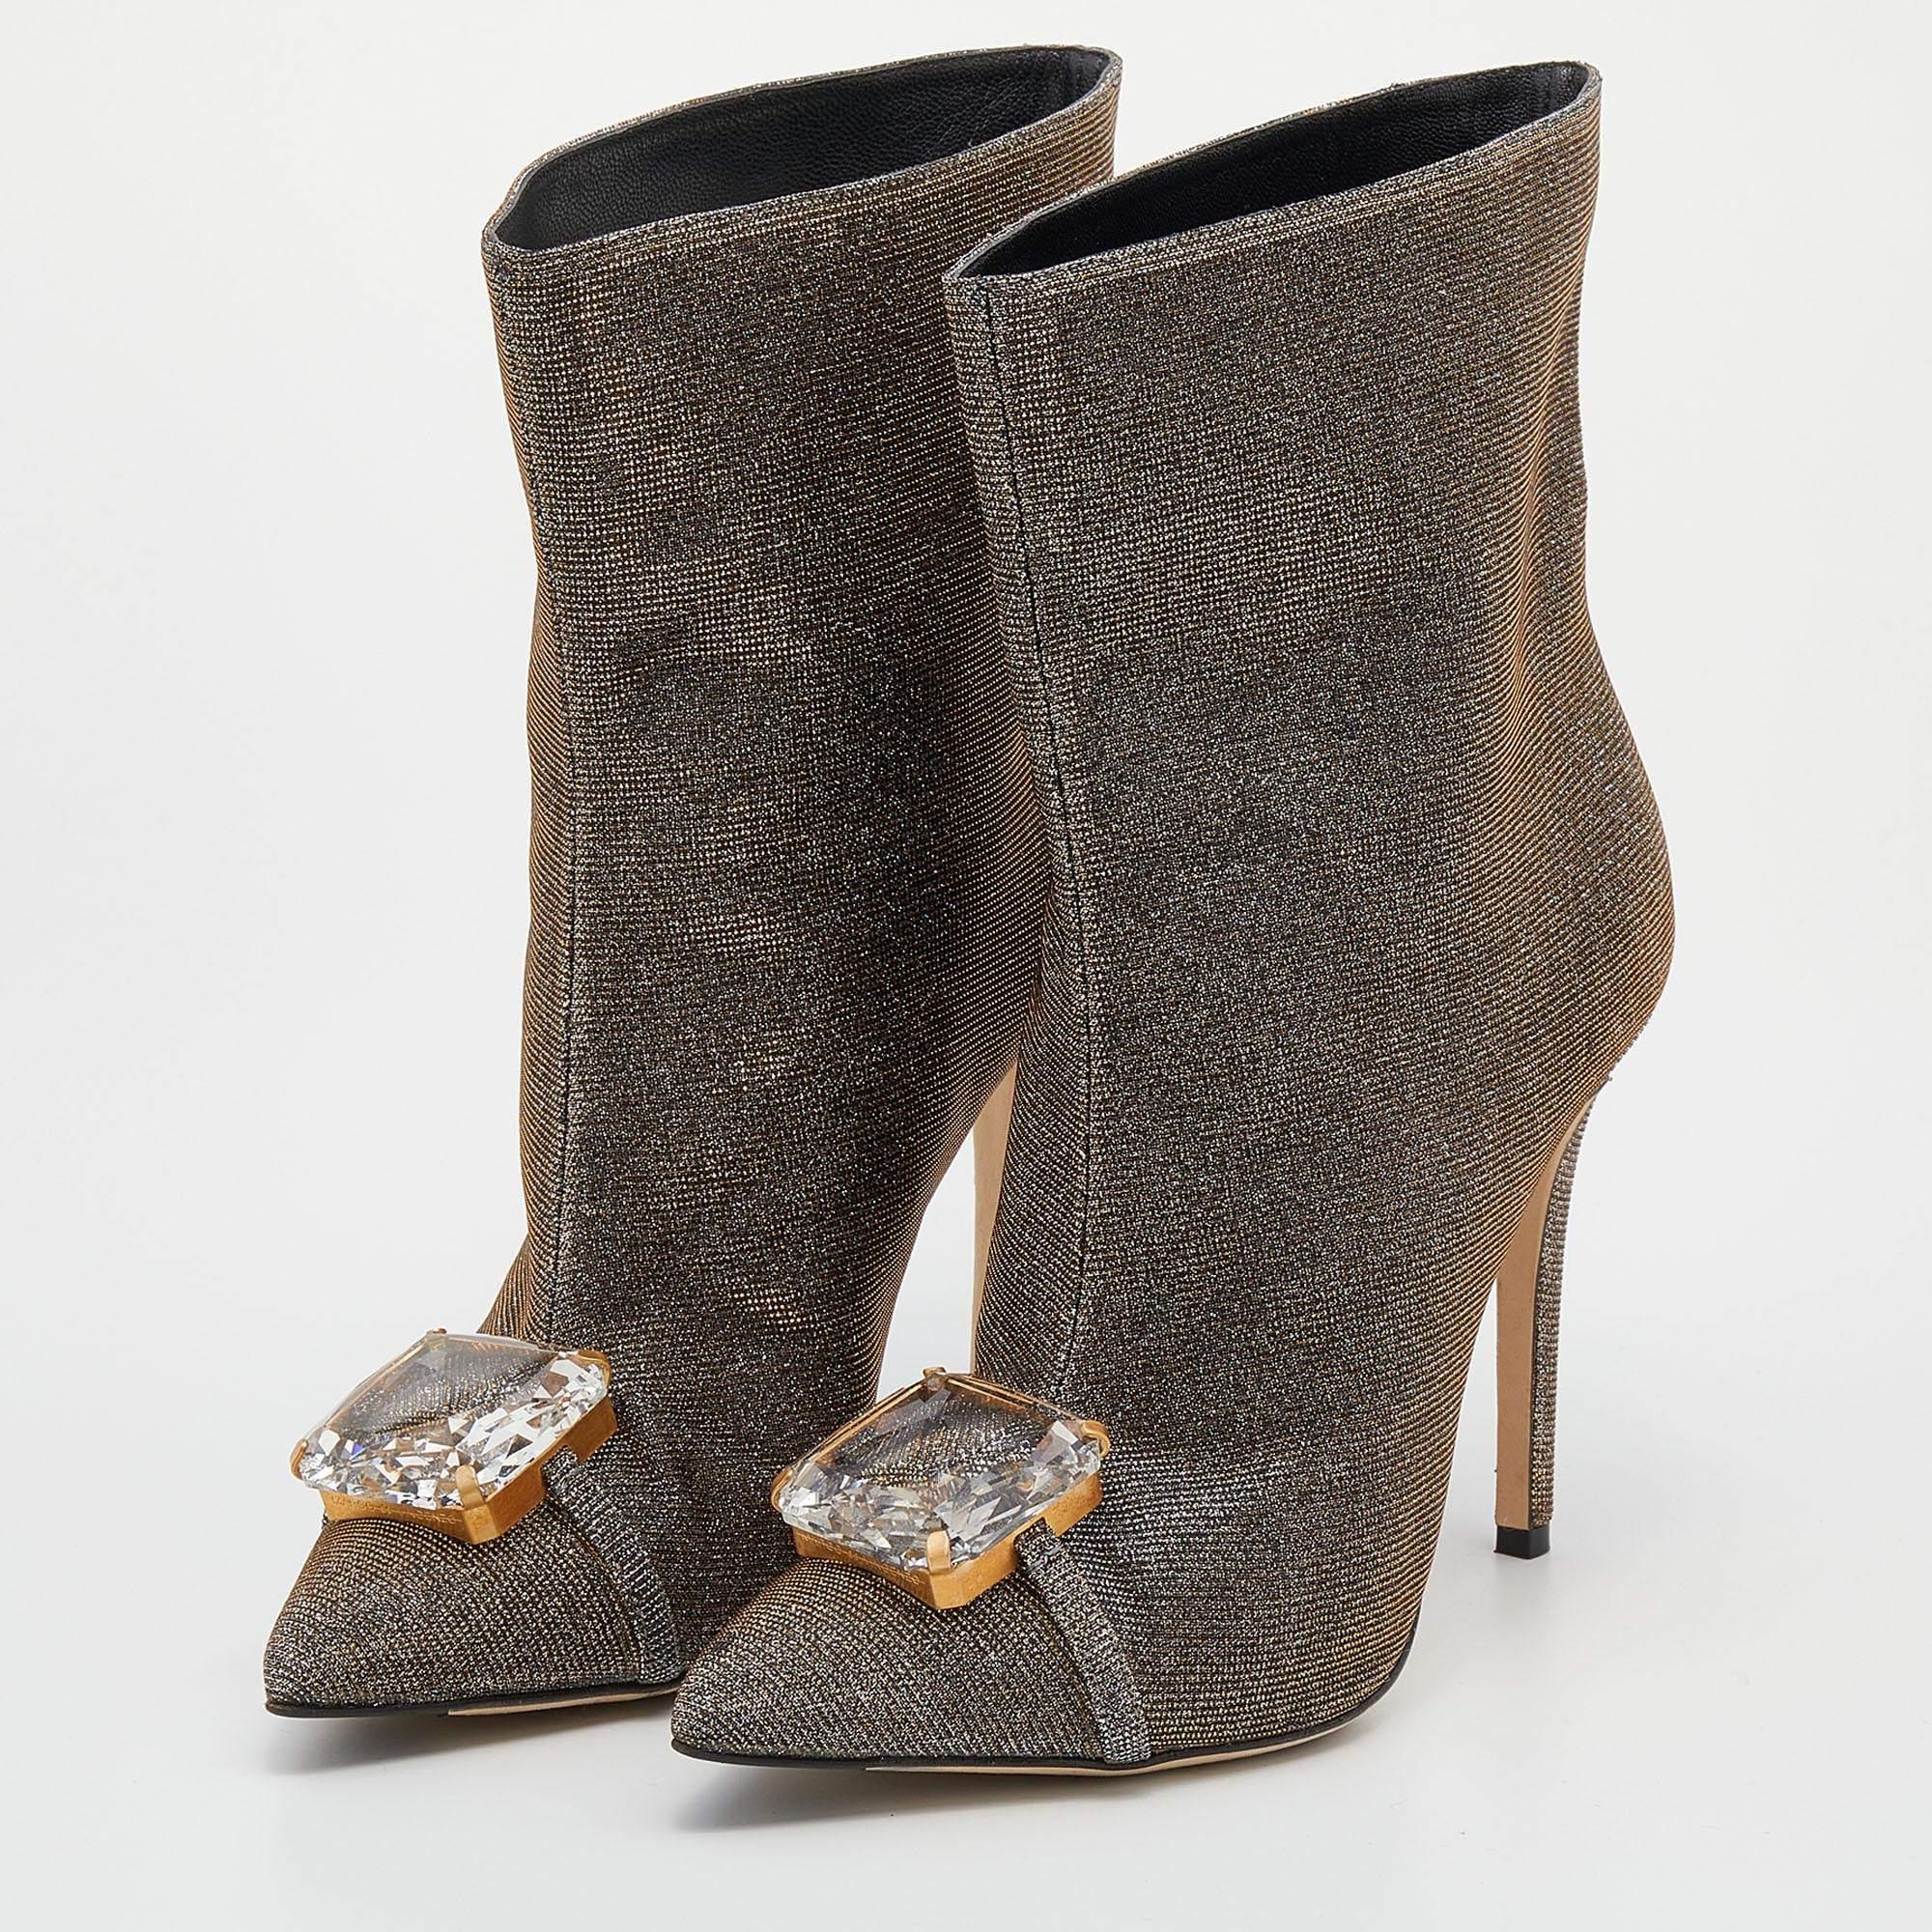 The crystal embellishment on the front elevates the silhouette of these Marco De Vincenzo boots. Created from metallic lurex fabric, they exhibit gold-tone hardware, 11.5cm heels, and a slip-on fitting.

